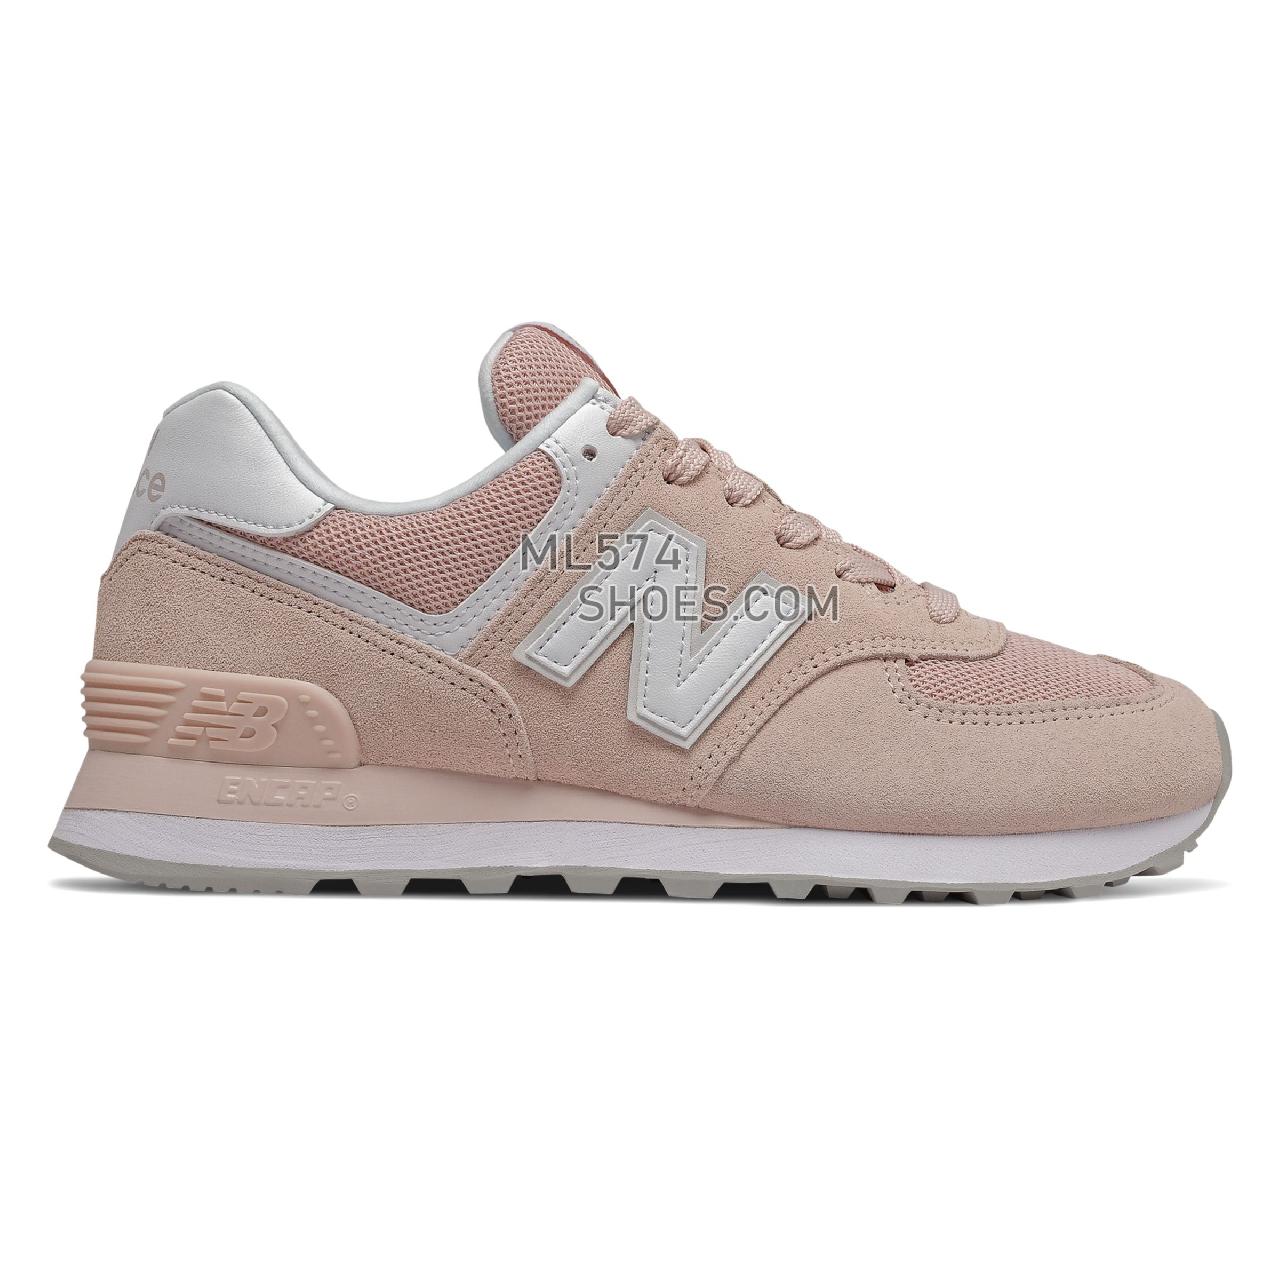 New Balance 574 - Women's Classic Sneakers - Smoked Salt with White - WL574OAB